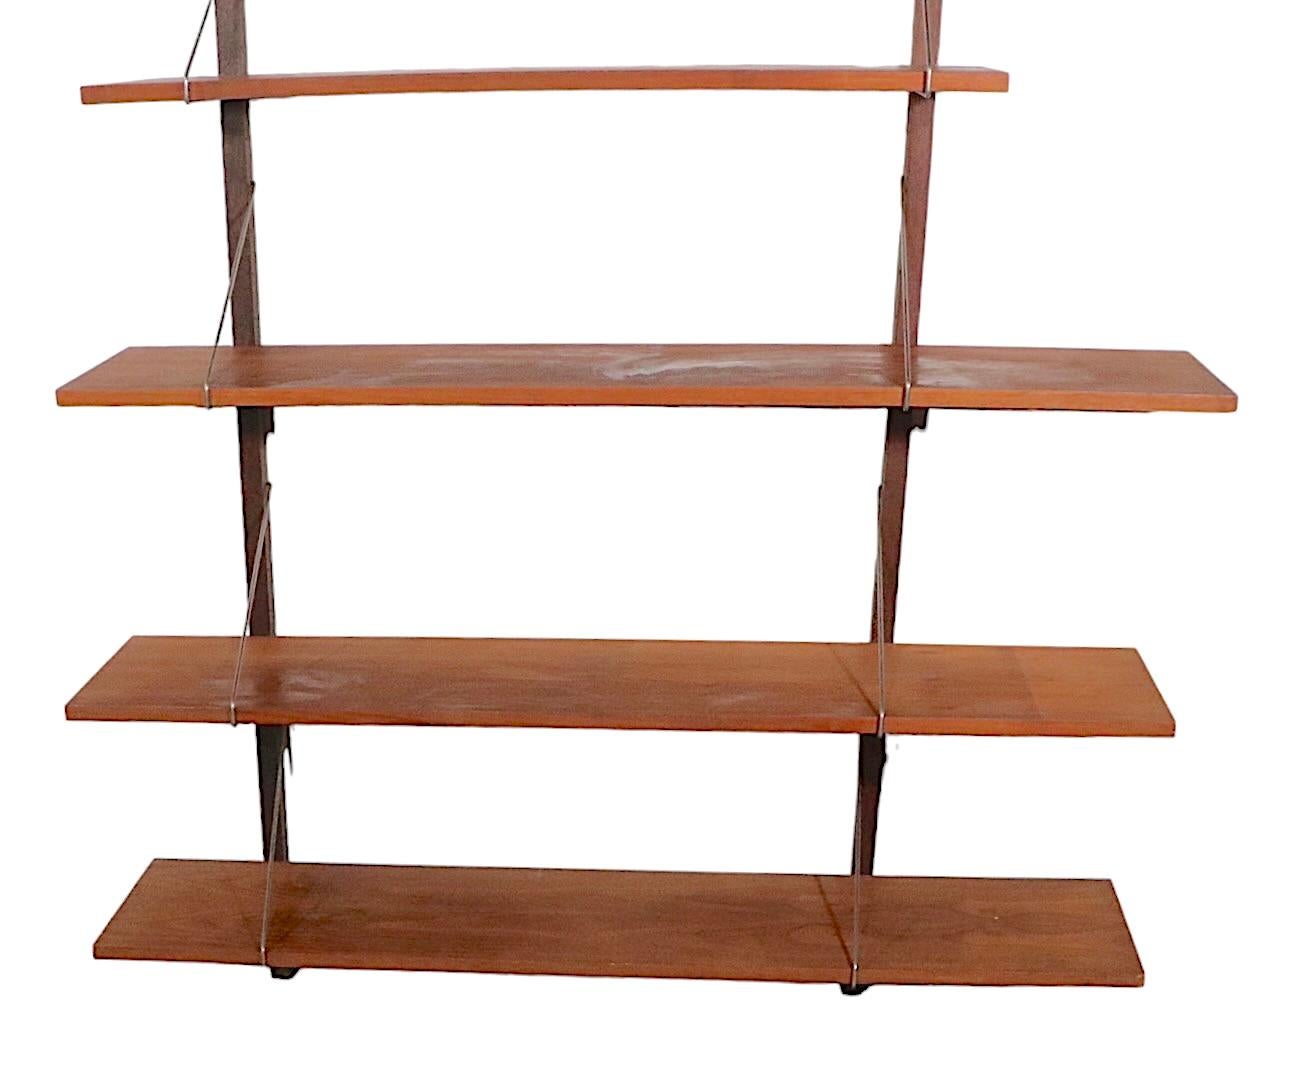 Danish Mid Century Wall Unit with 8 Shelves, circa 1950 - 1960s For Sale 4